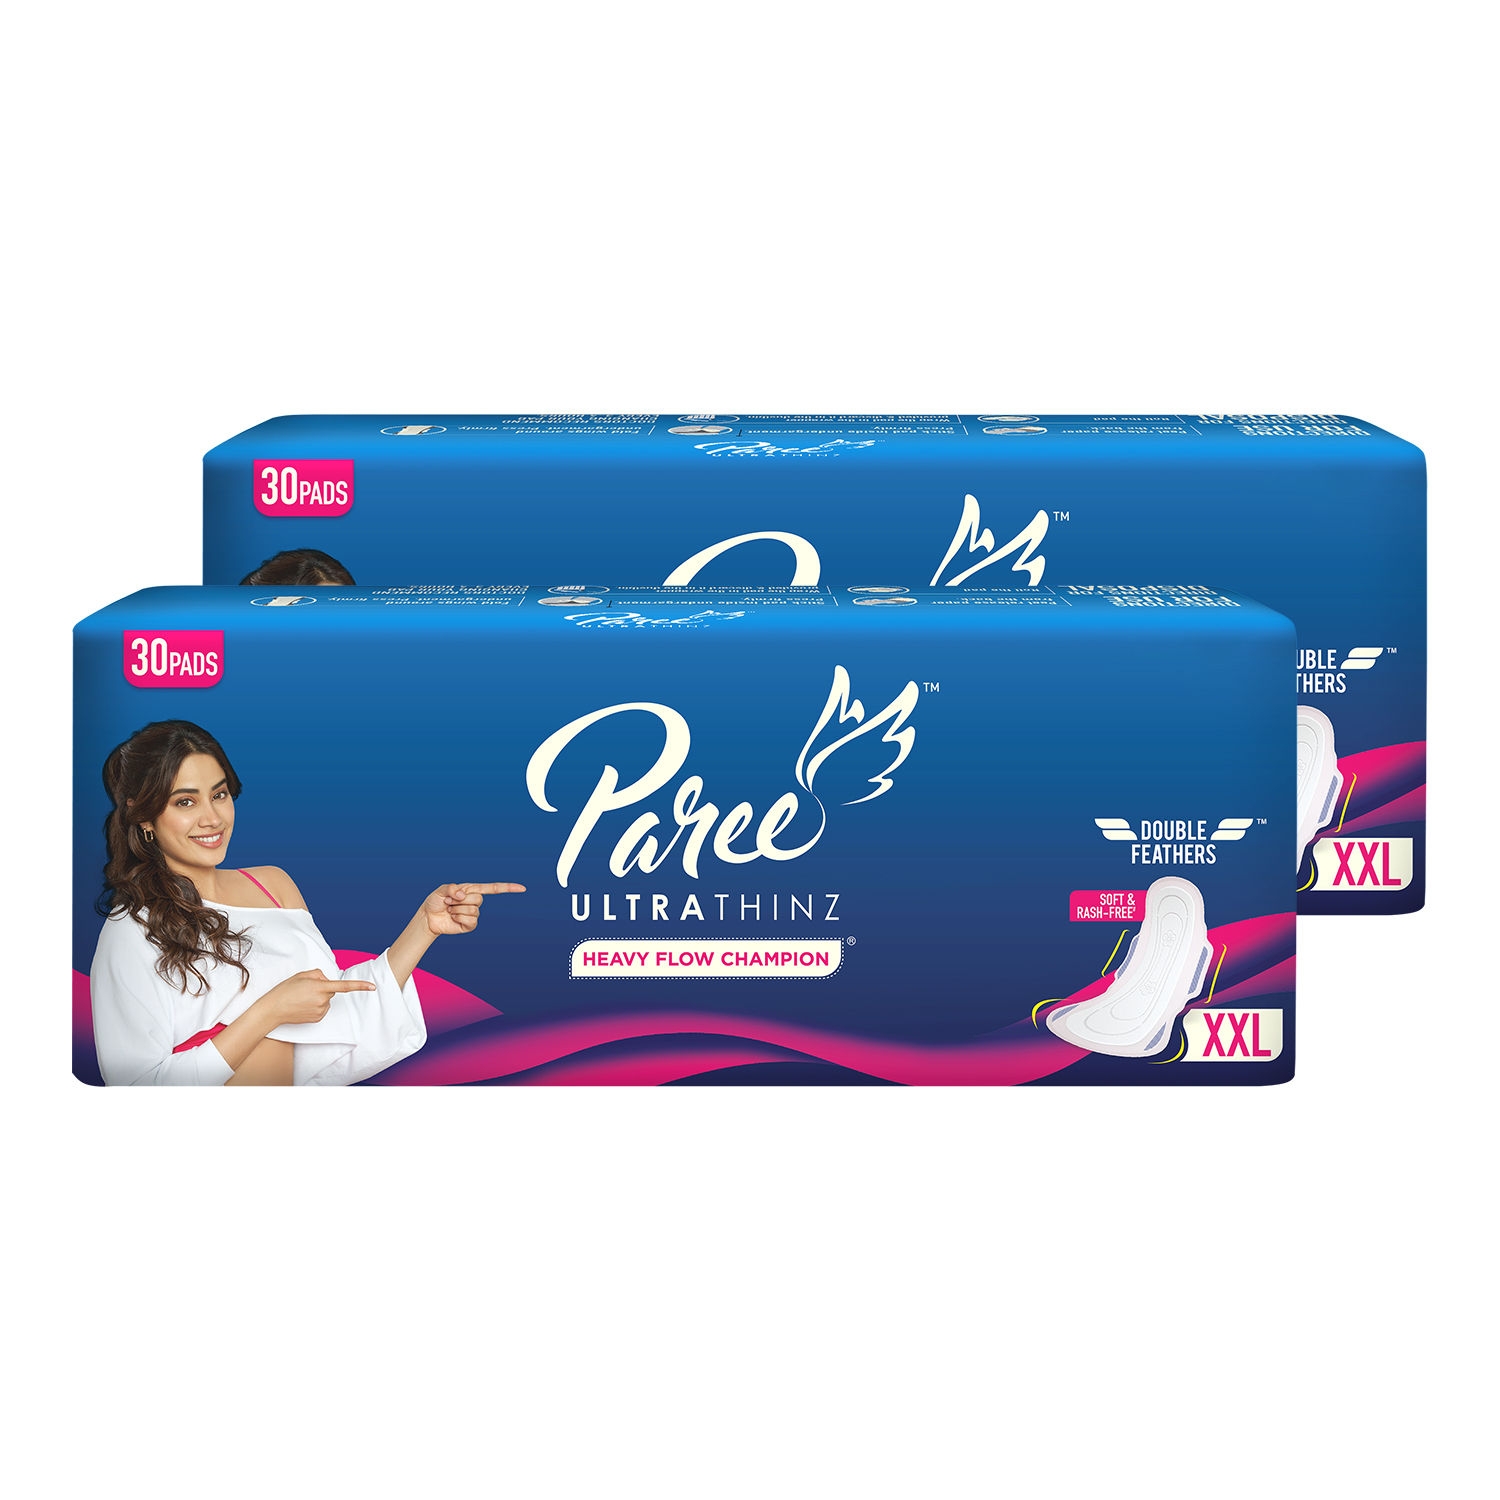 Paree Ultra Thinz 30 XXL Soft Feel Sanitary Pads with Frangrance (Tri-Fold) (Combo of 2)